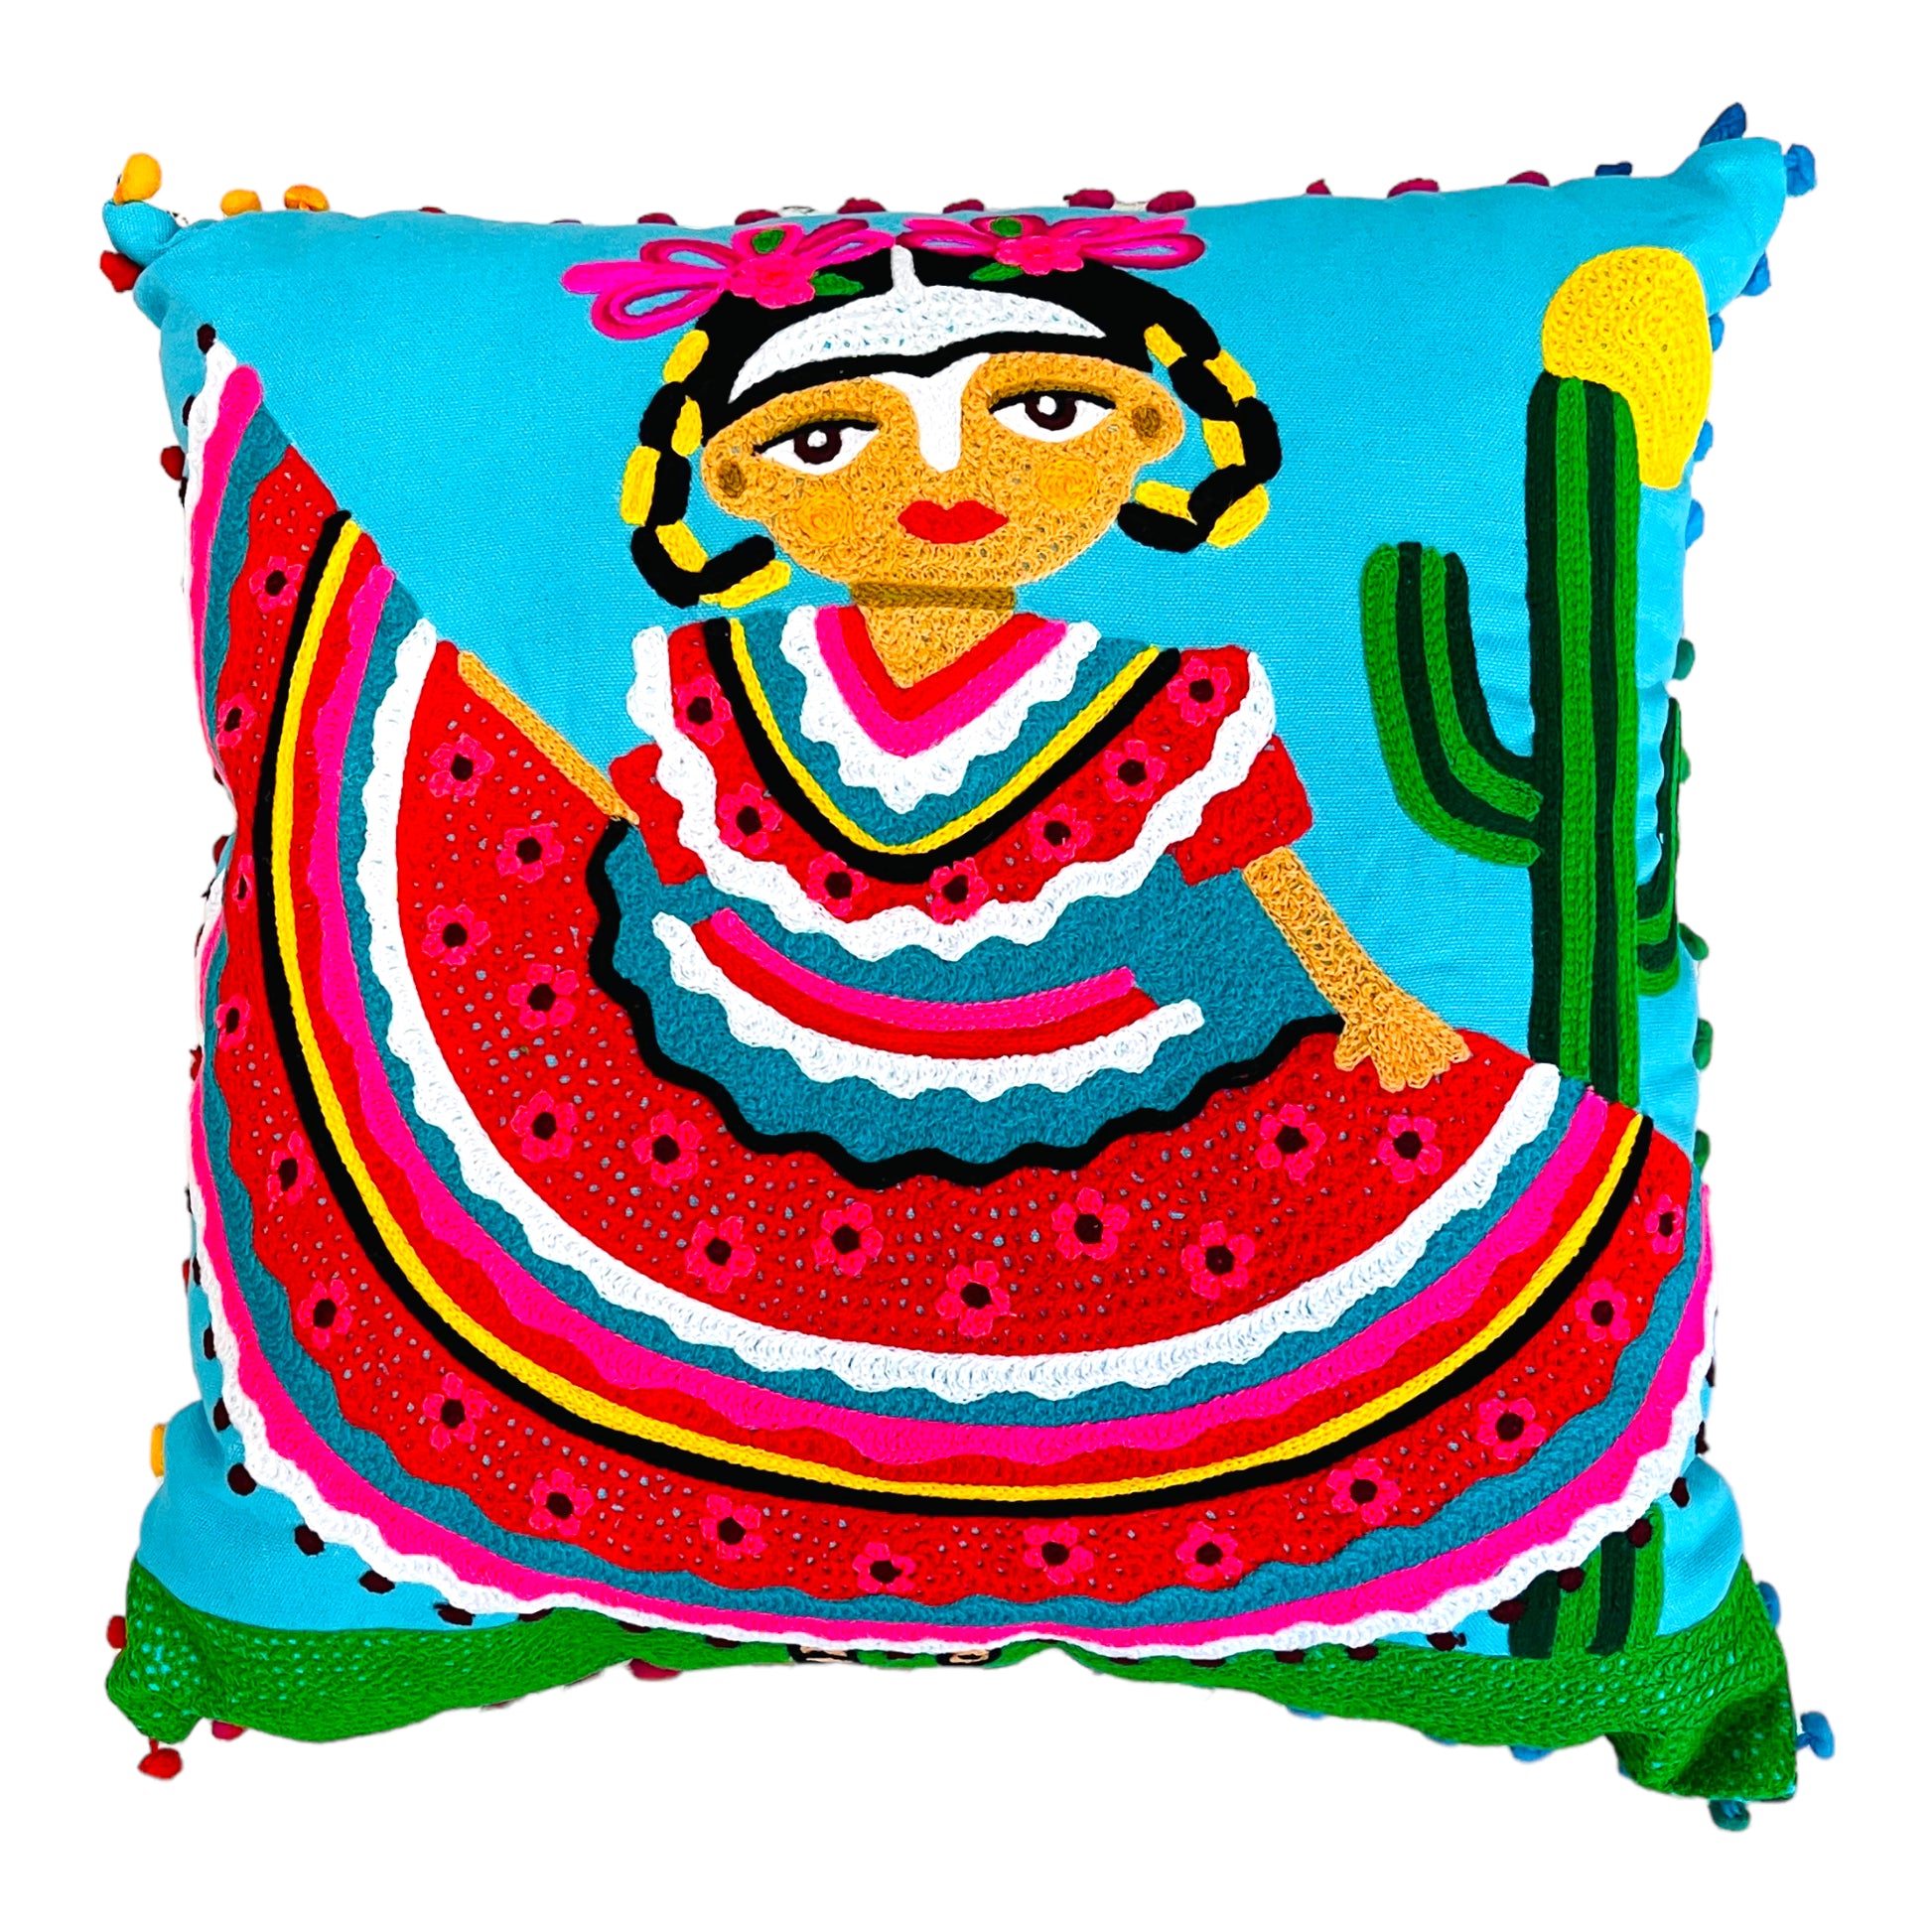 Hand-embroidered light blue pillow with an image of Frida Kahlo dressed in a typical Mexican costume in red, yellow and blue. The border of the pillow is decorated with small blue and red pompons. 